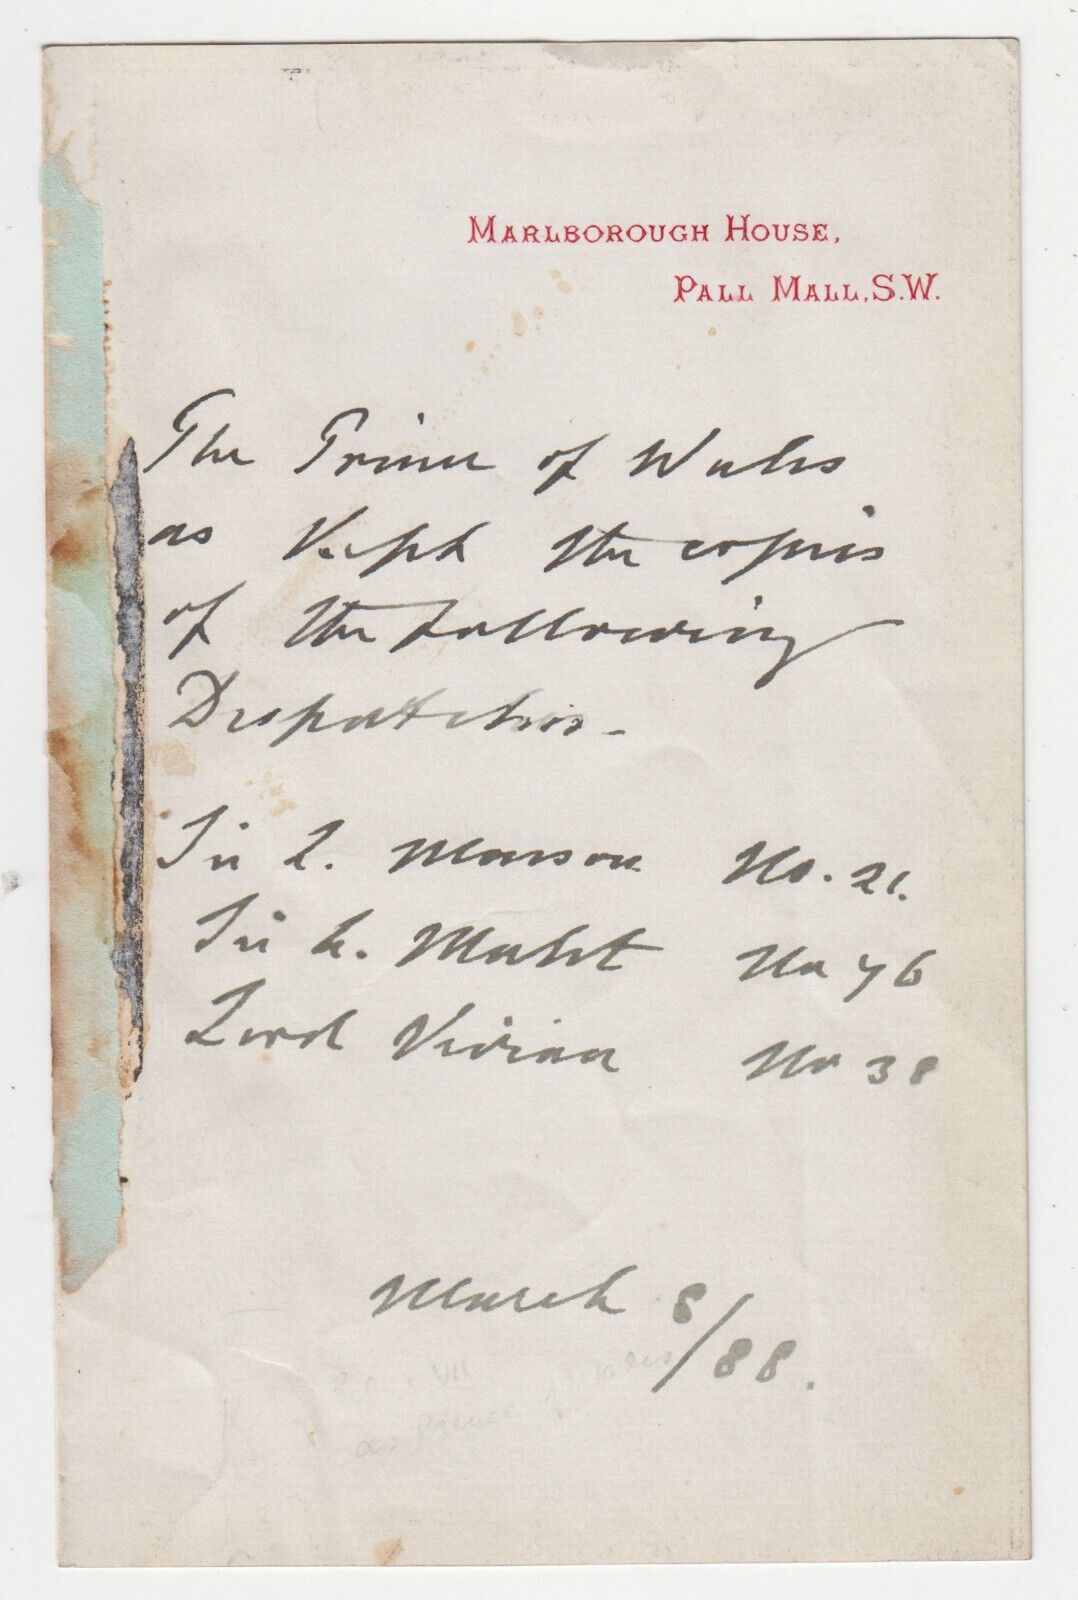 King Edward VII as Prince of Wales, 1888 3rd person autograph letter